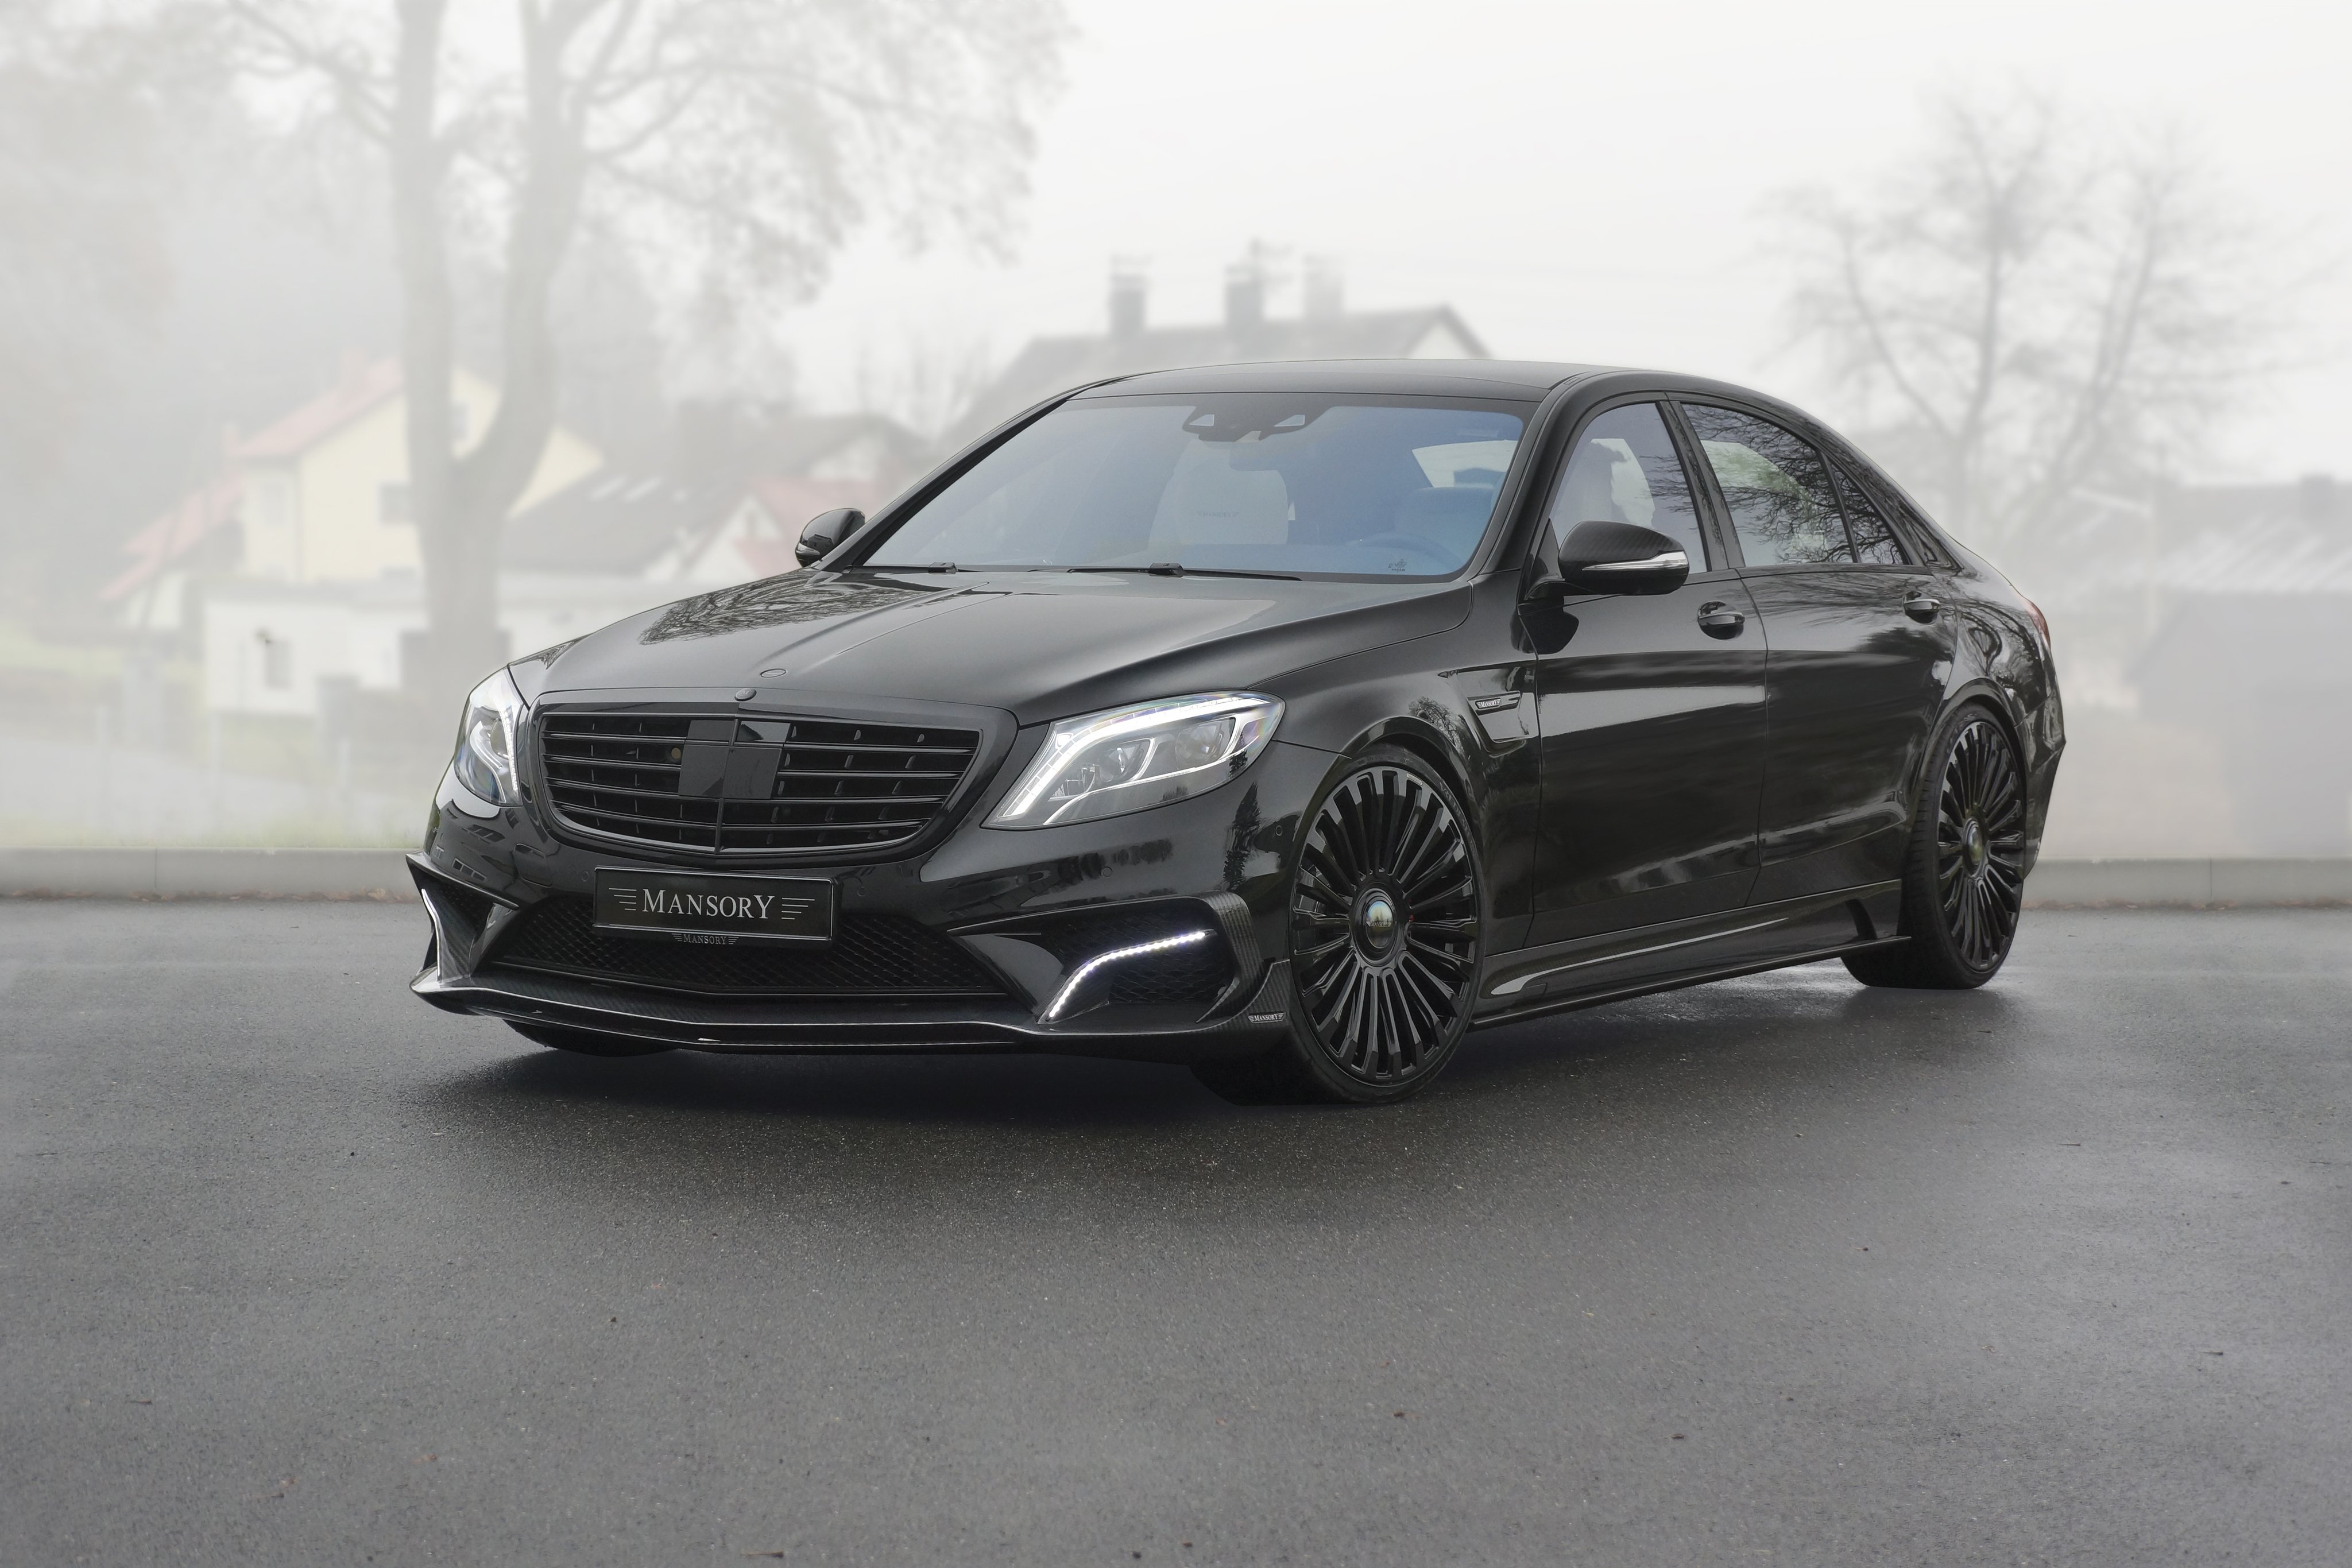 2014, Mansory, Mercedes, Benz, S63, Amg,  w222 , Tuning Wallpaper